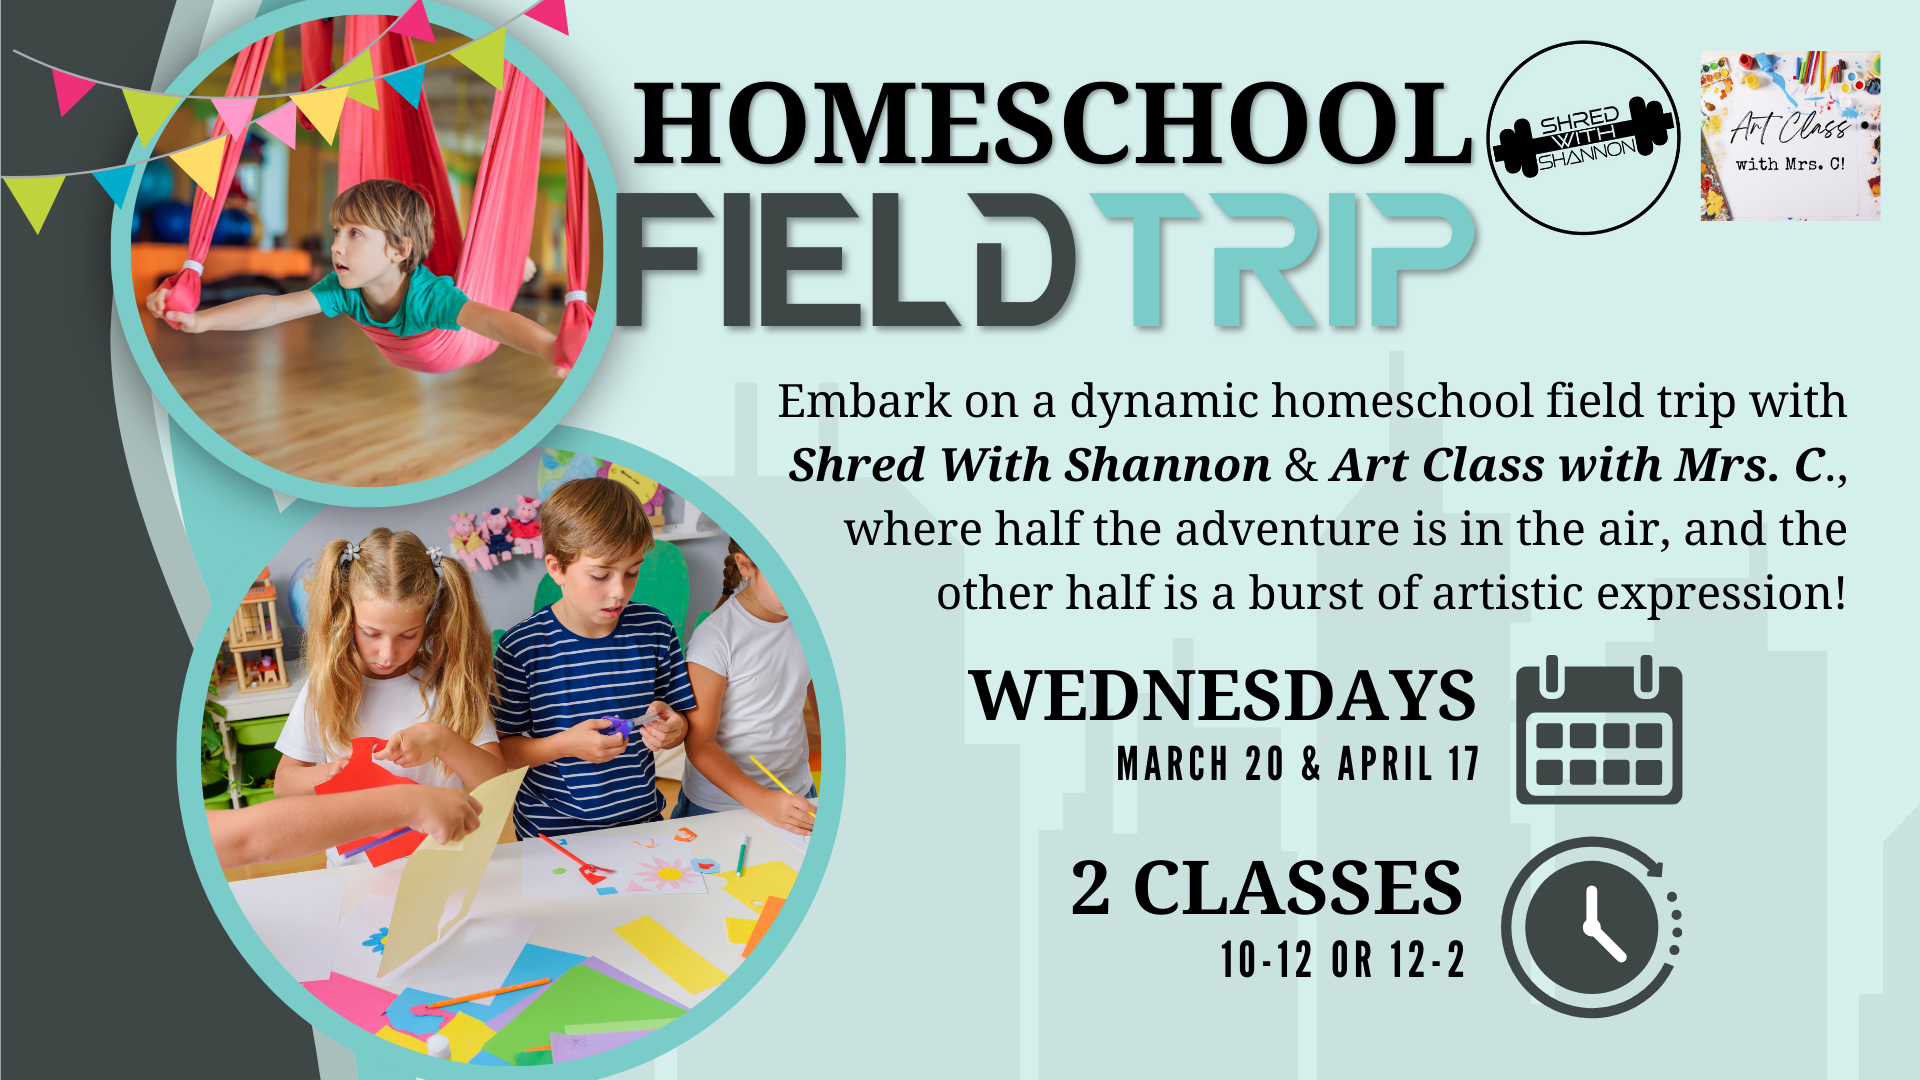 a poster for a homeschool field trip on wednesdays